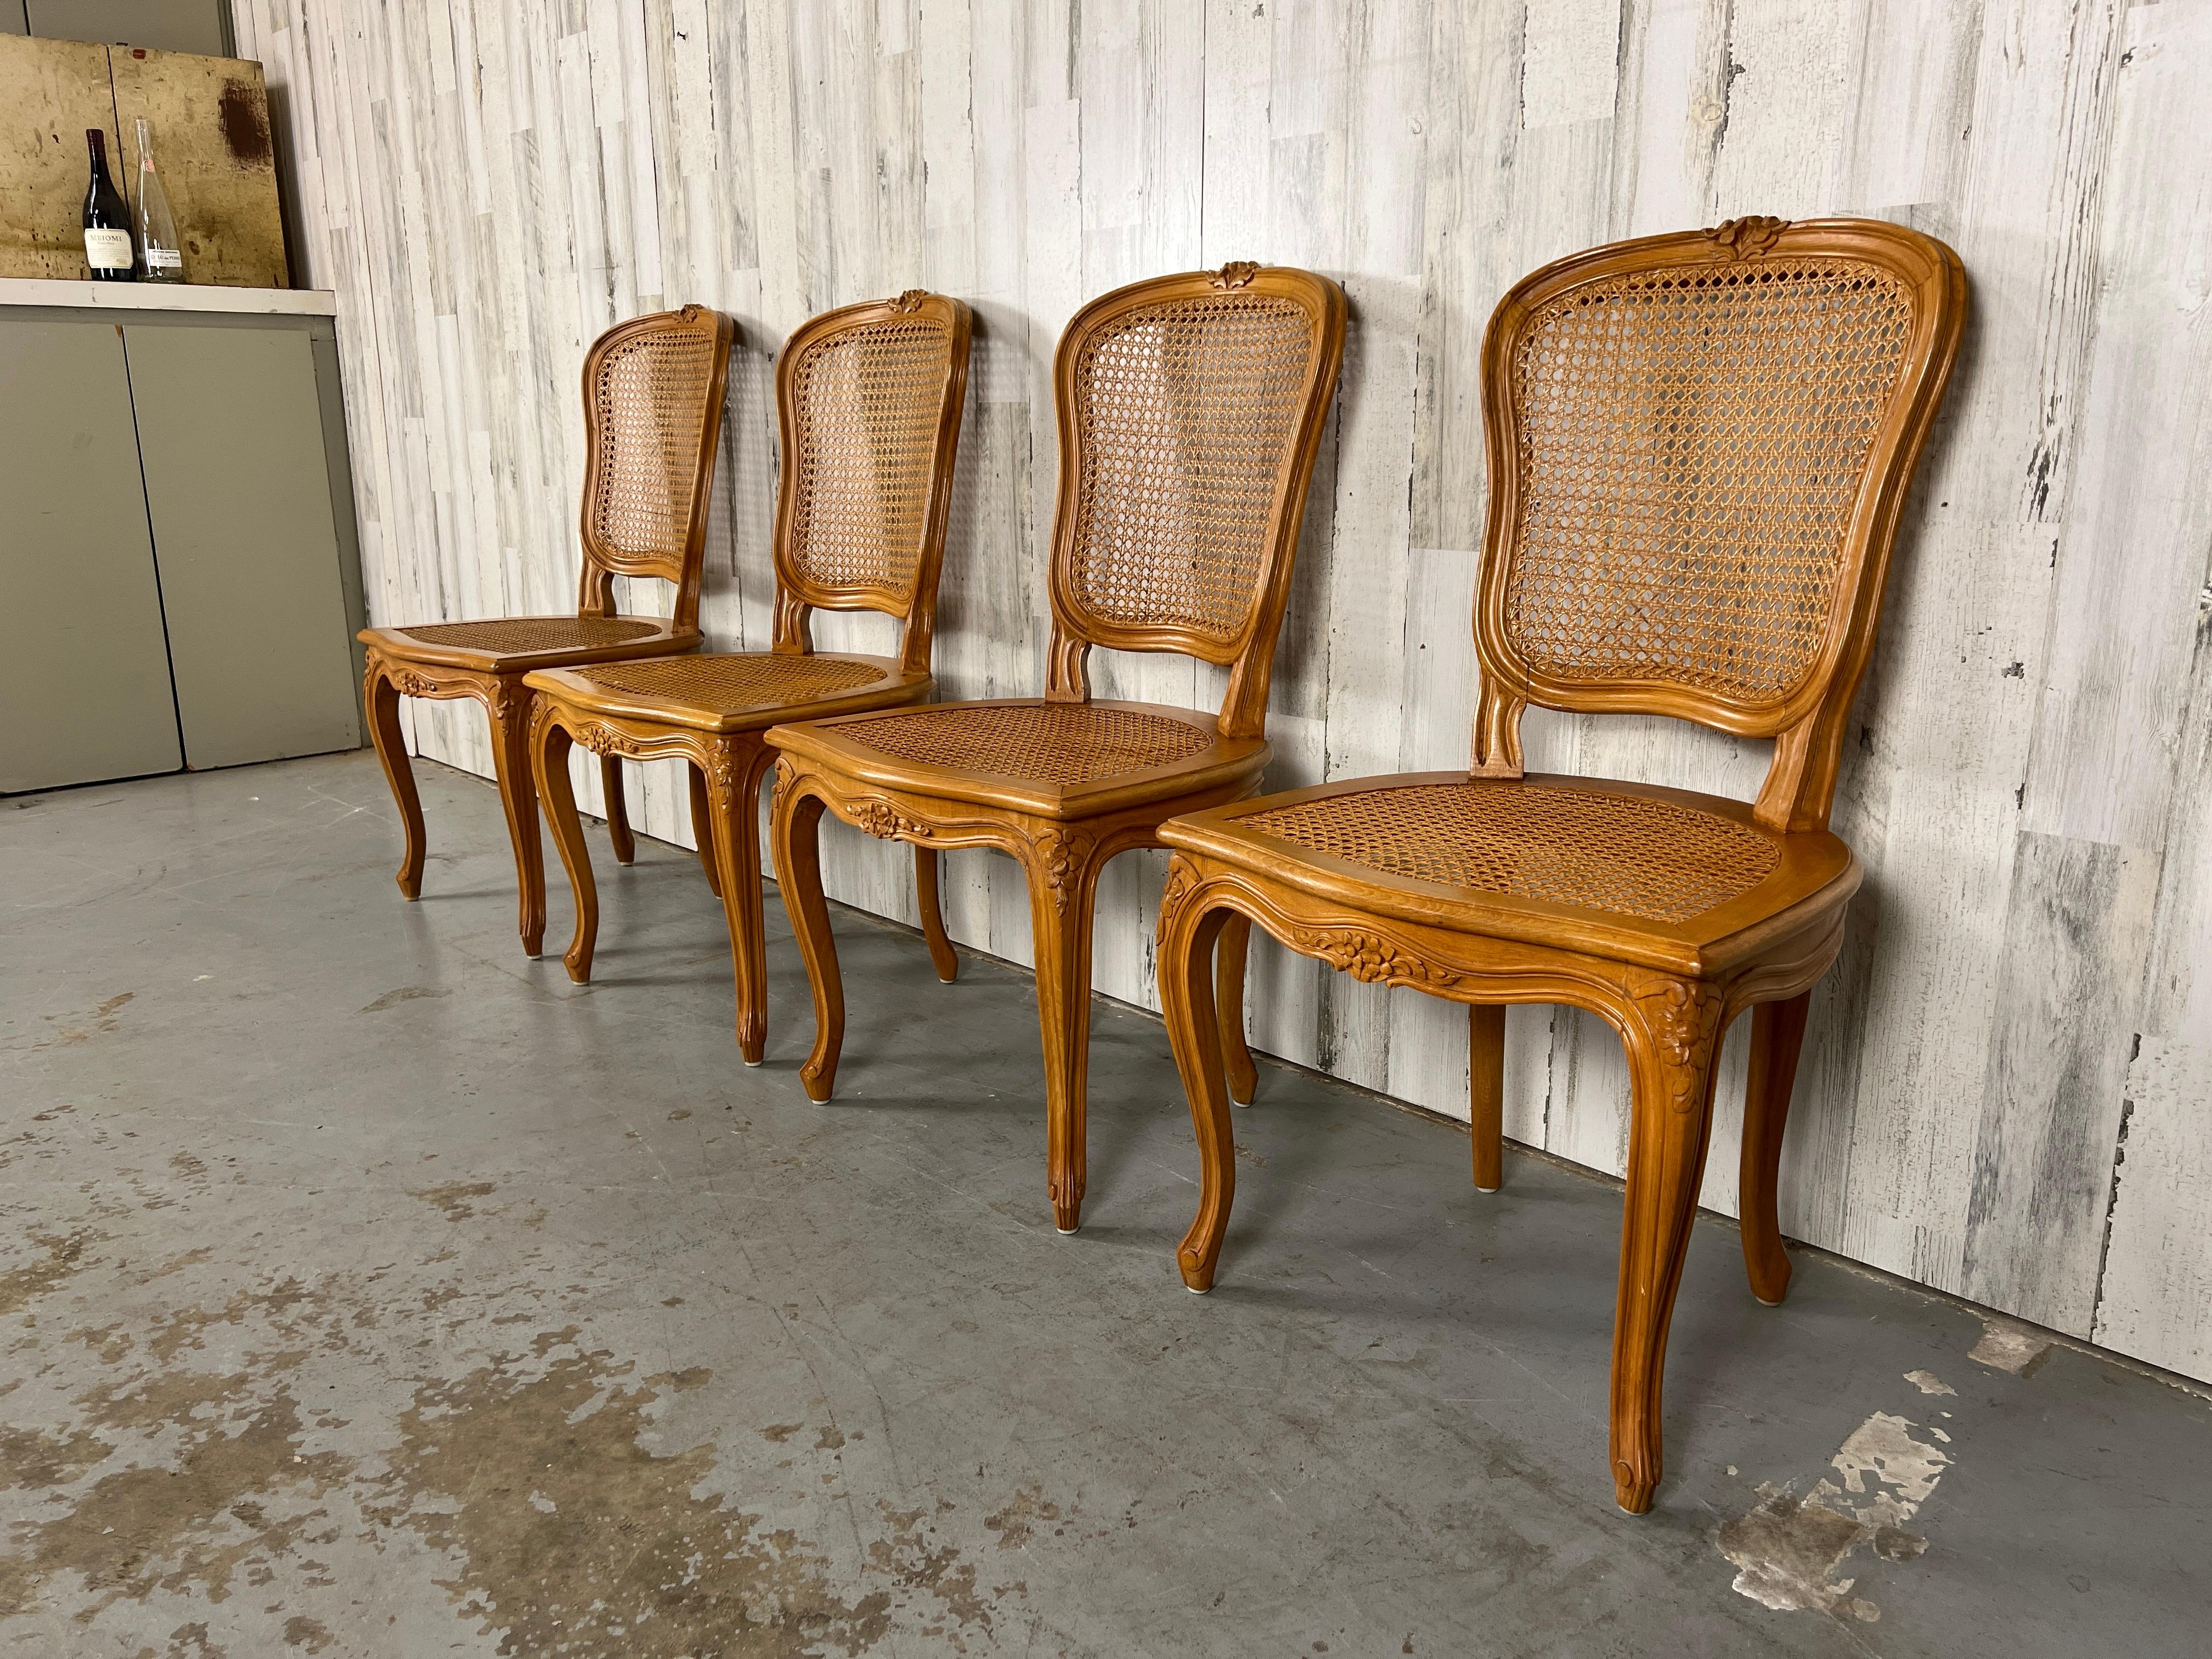 Set of Four beech wood cane chairs crafted in the style of Louis XIV. These chairs are very comfortable from the curved back and sturdy frames for hours of enjoyment.